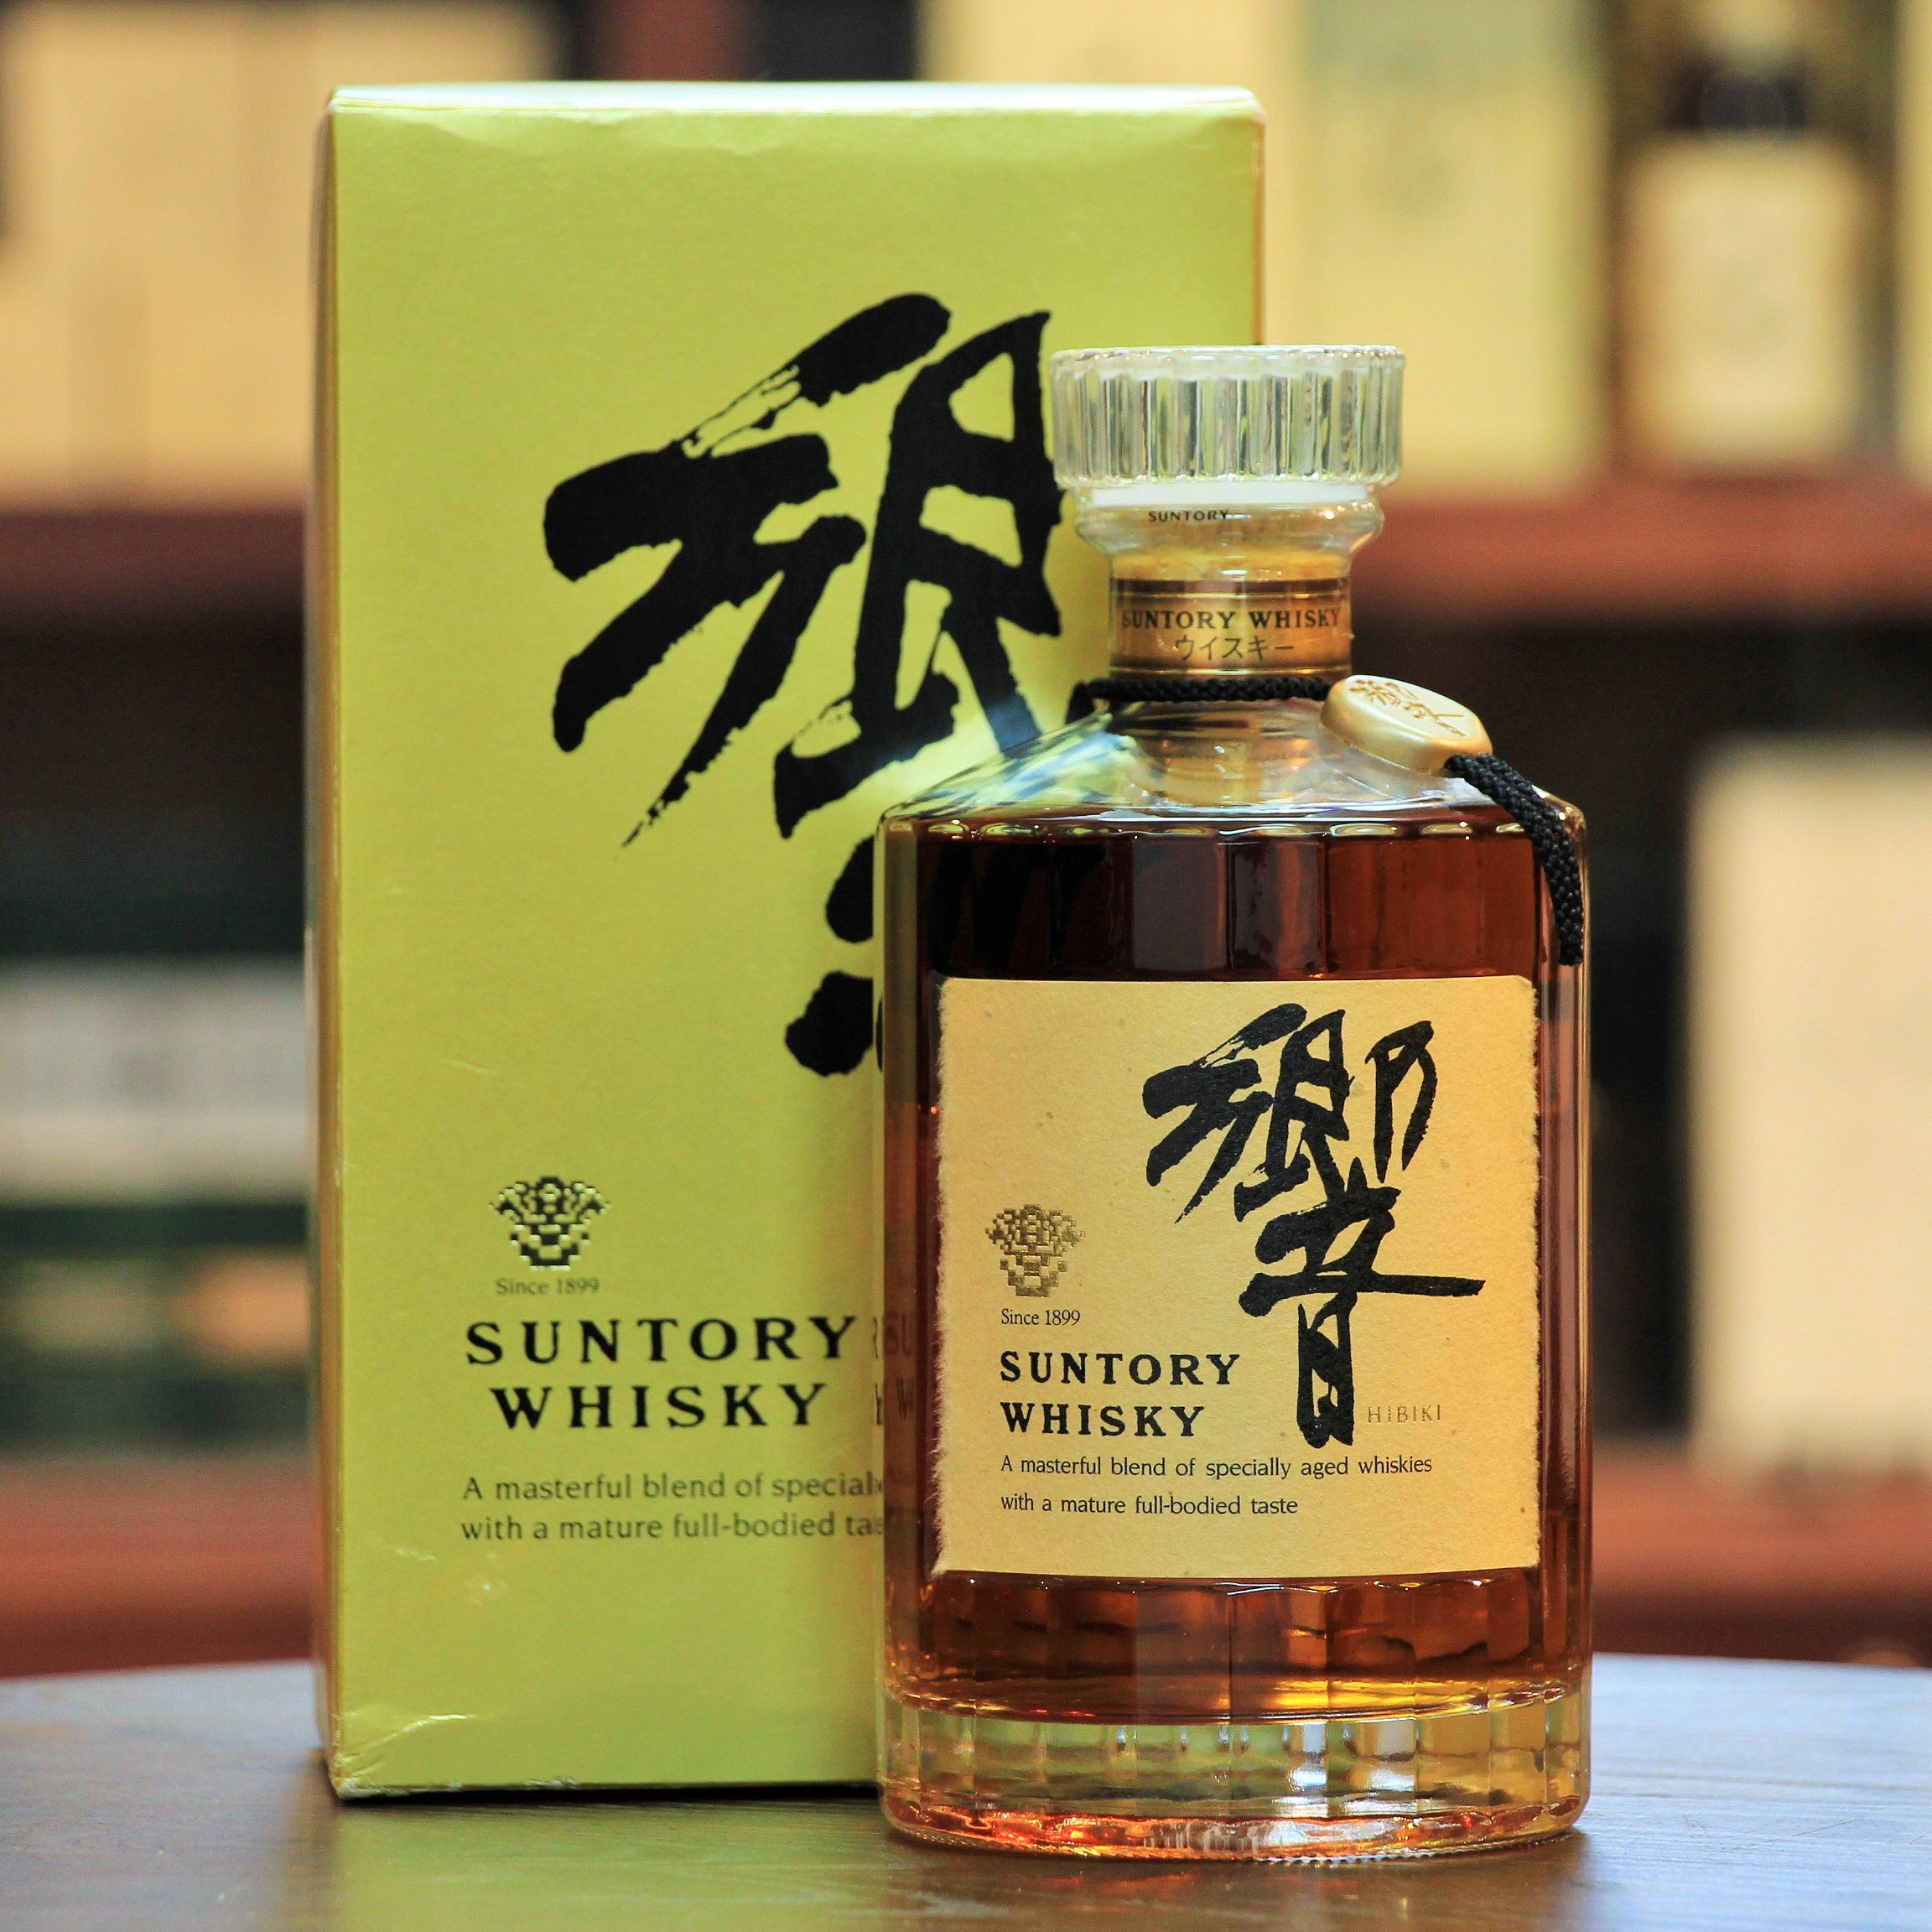 Hibiki Circa 1990 with Box Old Vintage Bottling, A 1990’s bottling (possibly late 80’s) that has no age statement but is supposedly aged 17 years. The name ‘Hibiki’ is written in very small letters on the box and label with “Suntory Whisky” dominating the design instead.